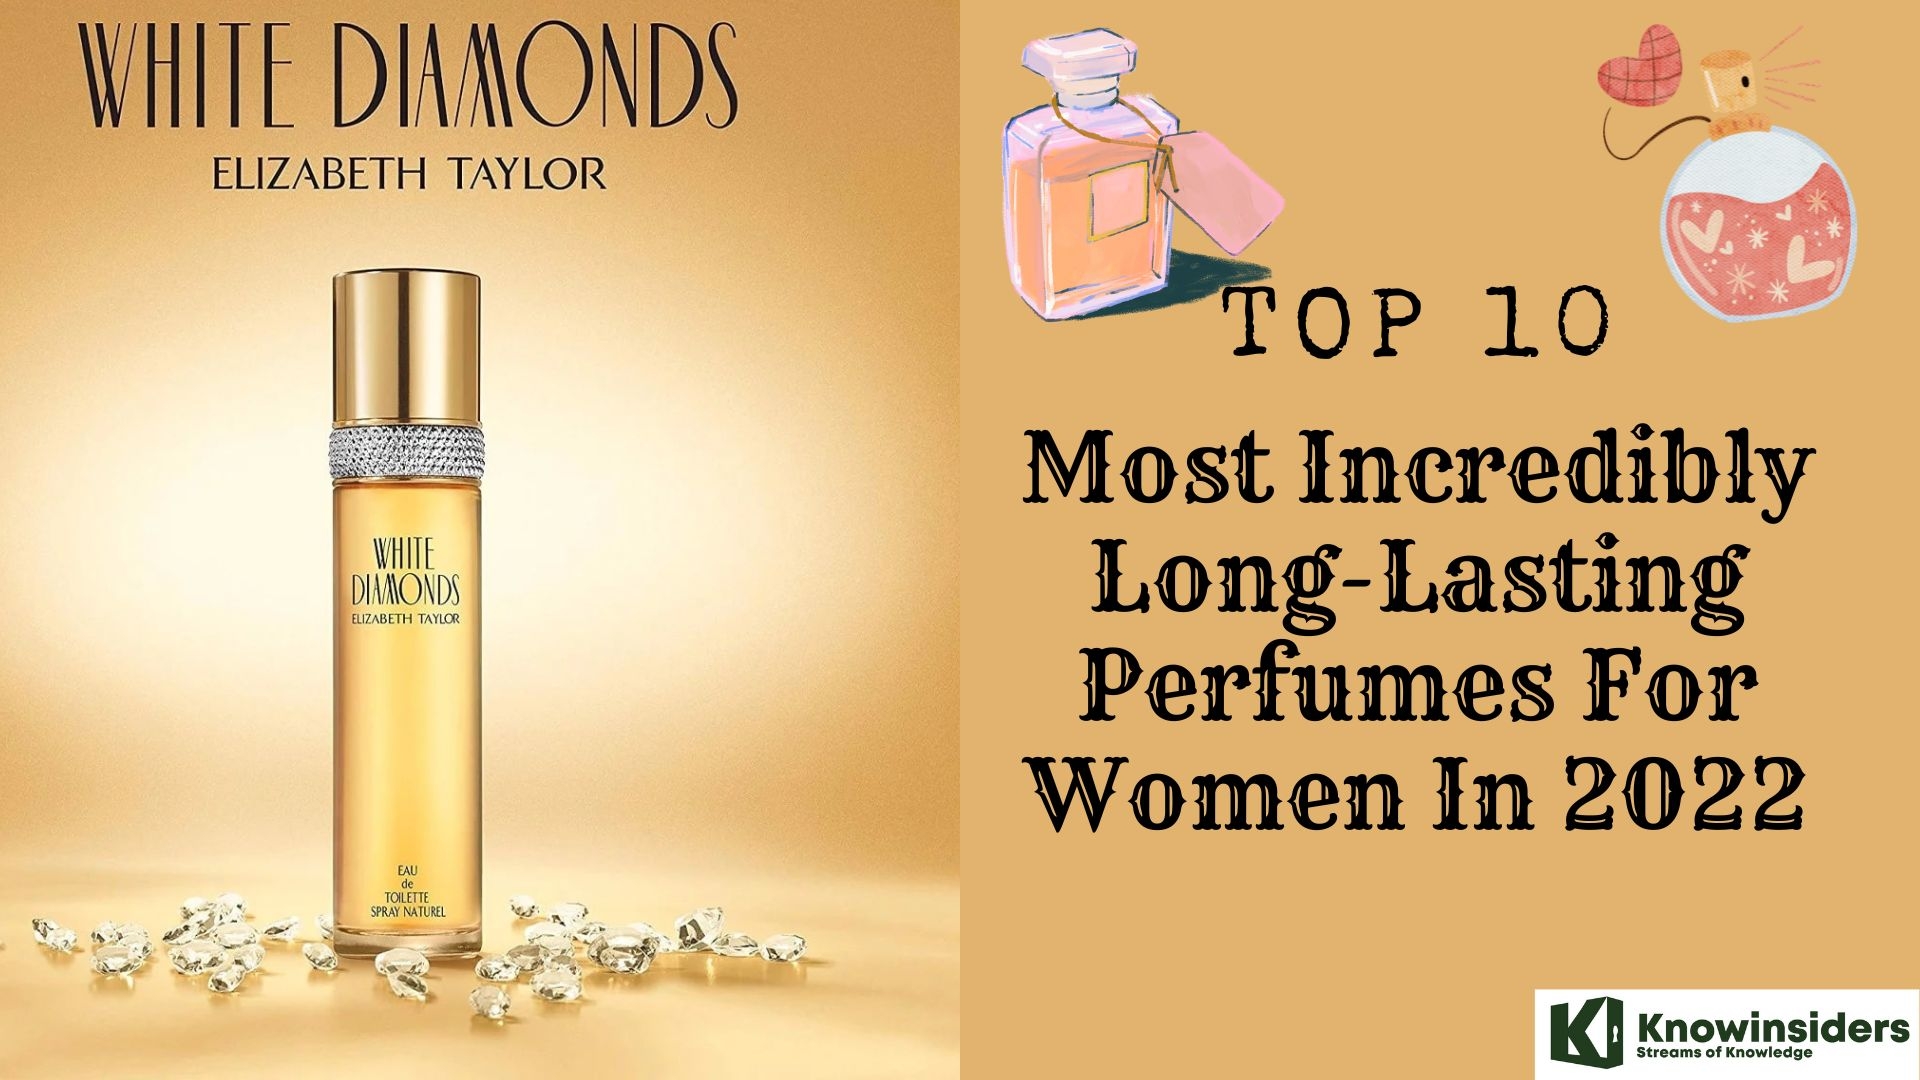 Top 10 Best And Most Incredibly Long-Lasting Perfumes For Women In 2022. Knowinsiders.com